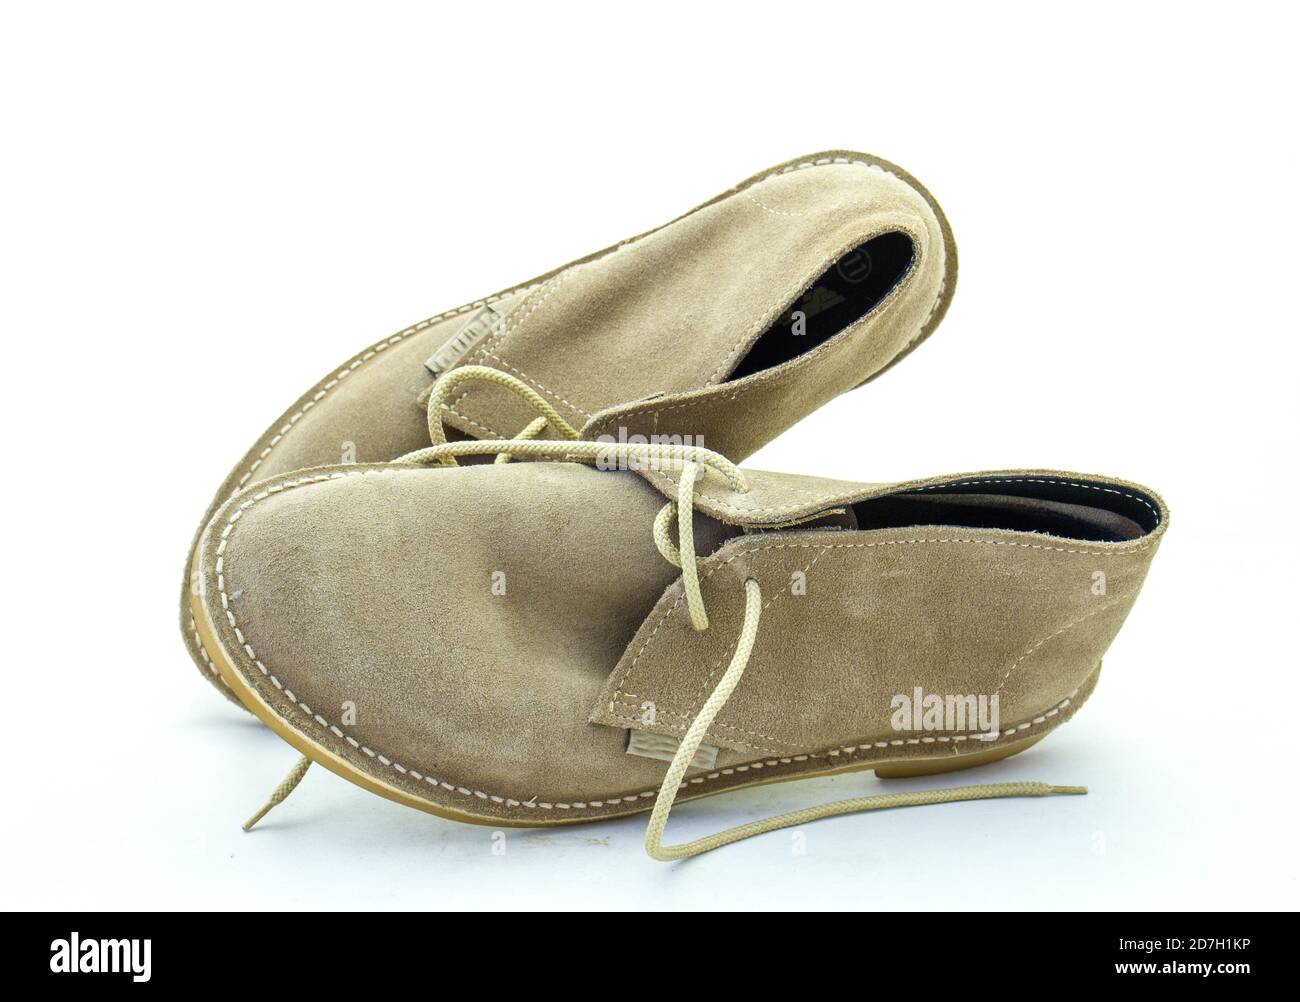 A pair of traditional South African velskoene shoes isolated on a clear background image with copy space in horizontal format Stock Photo